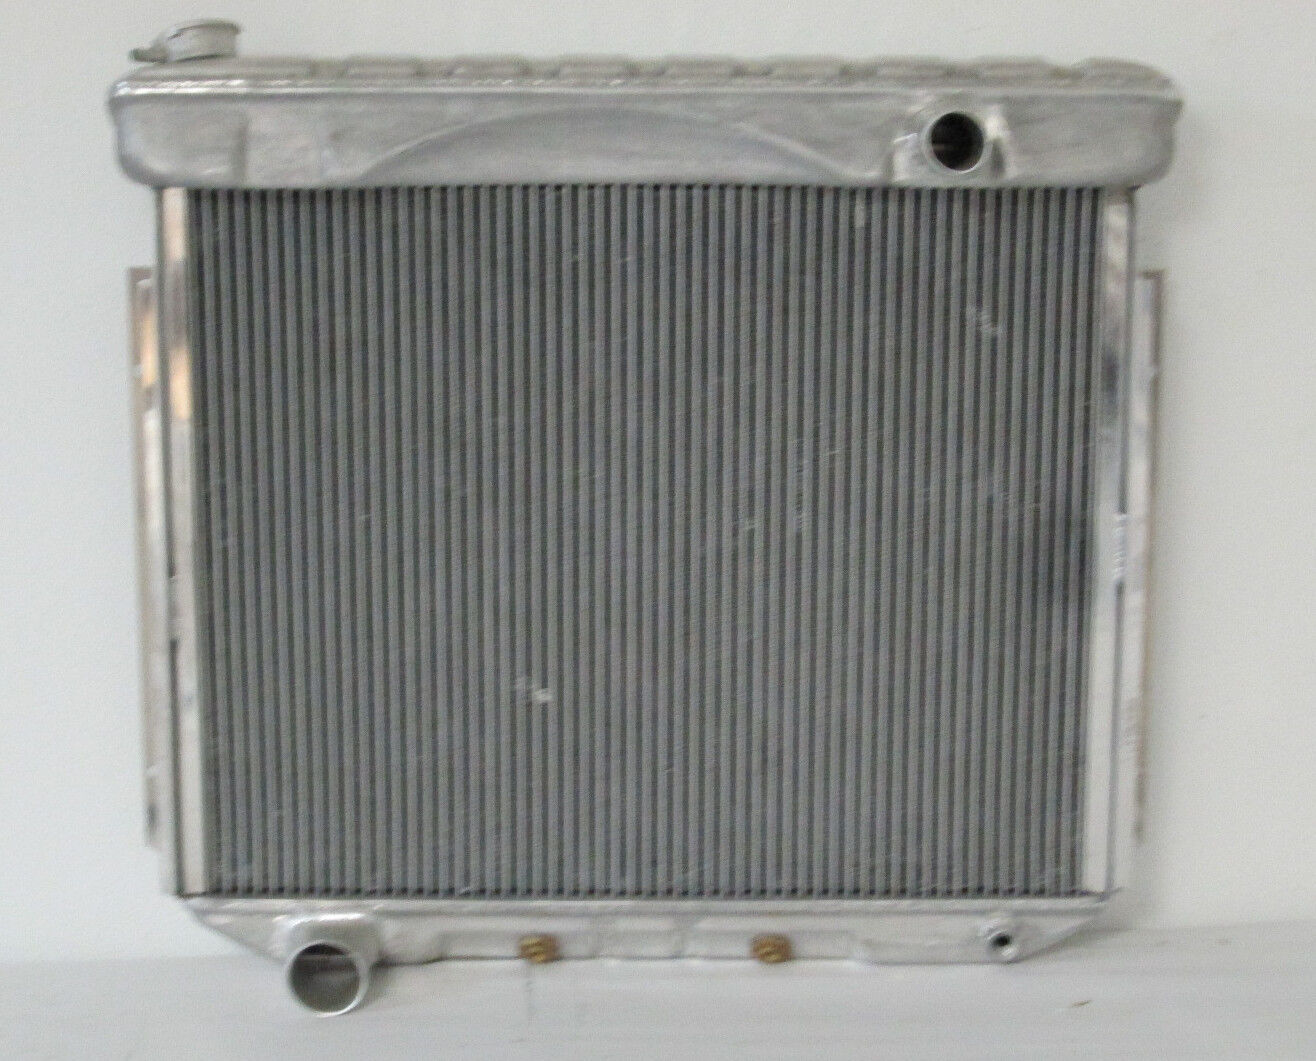 Ford Aluminum Radiator 1957 to 1959 Full Size Ford and Mercury Lifetime Warranty